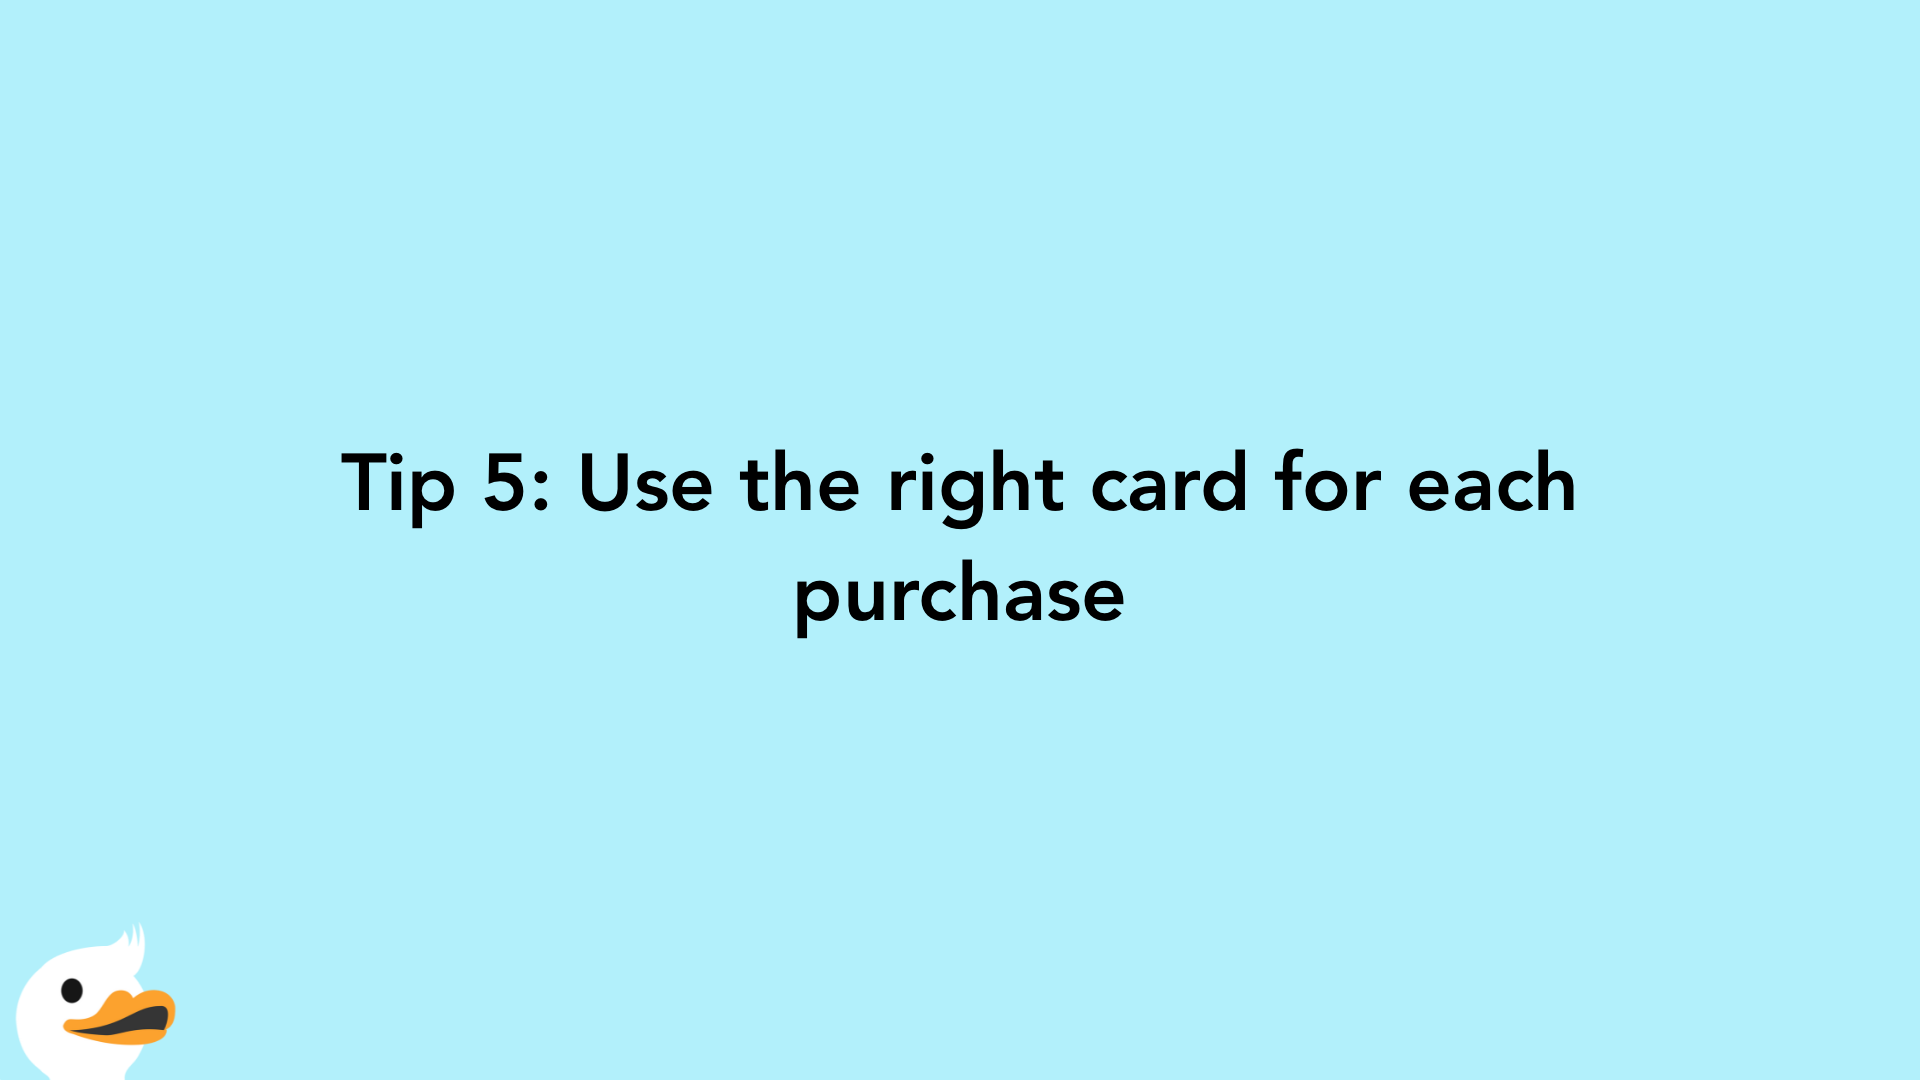 Tip 5: Use the right card for each purchase